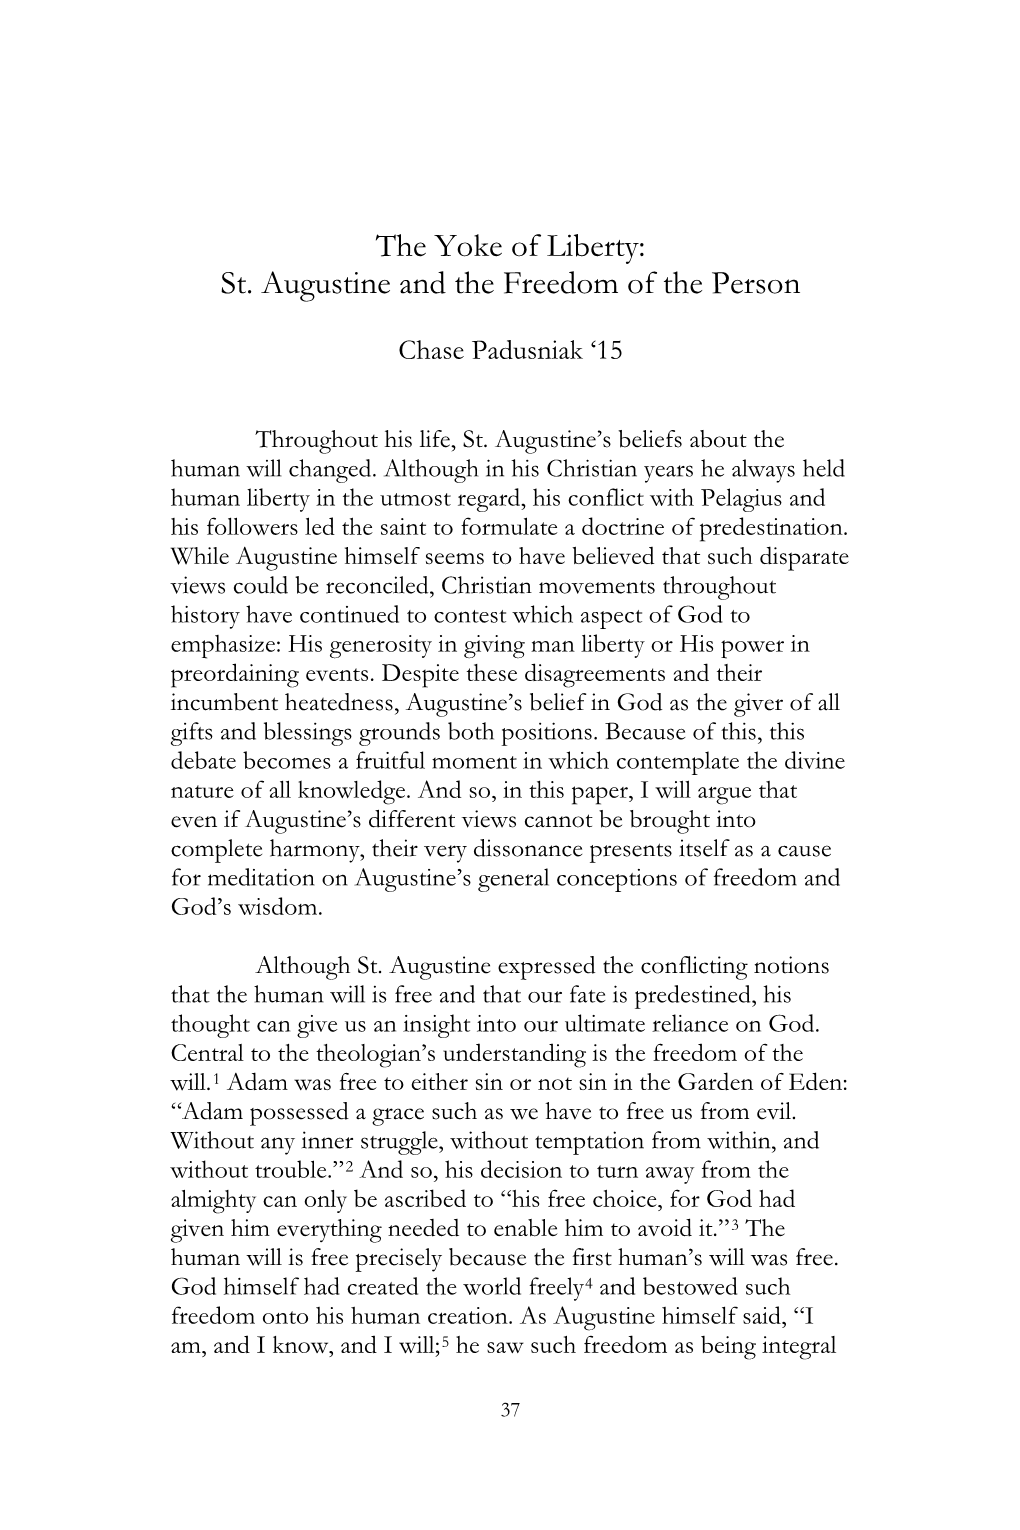 The Yoke of Liberty: St. Augustine and the Freedom of the Person